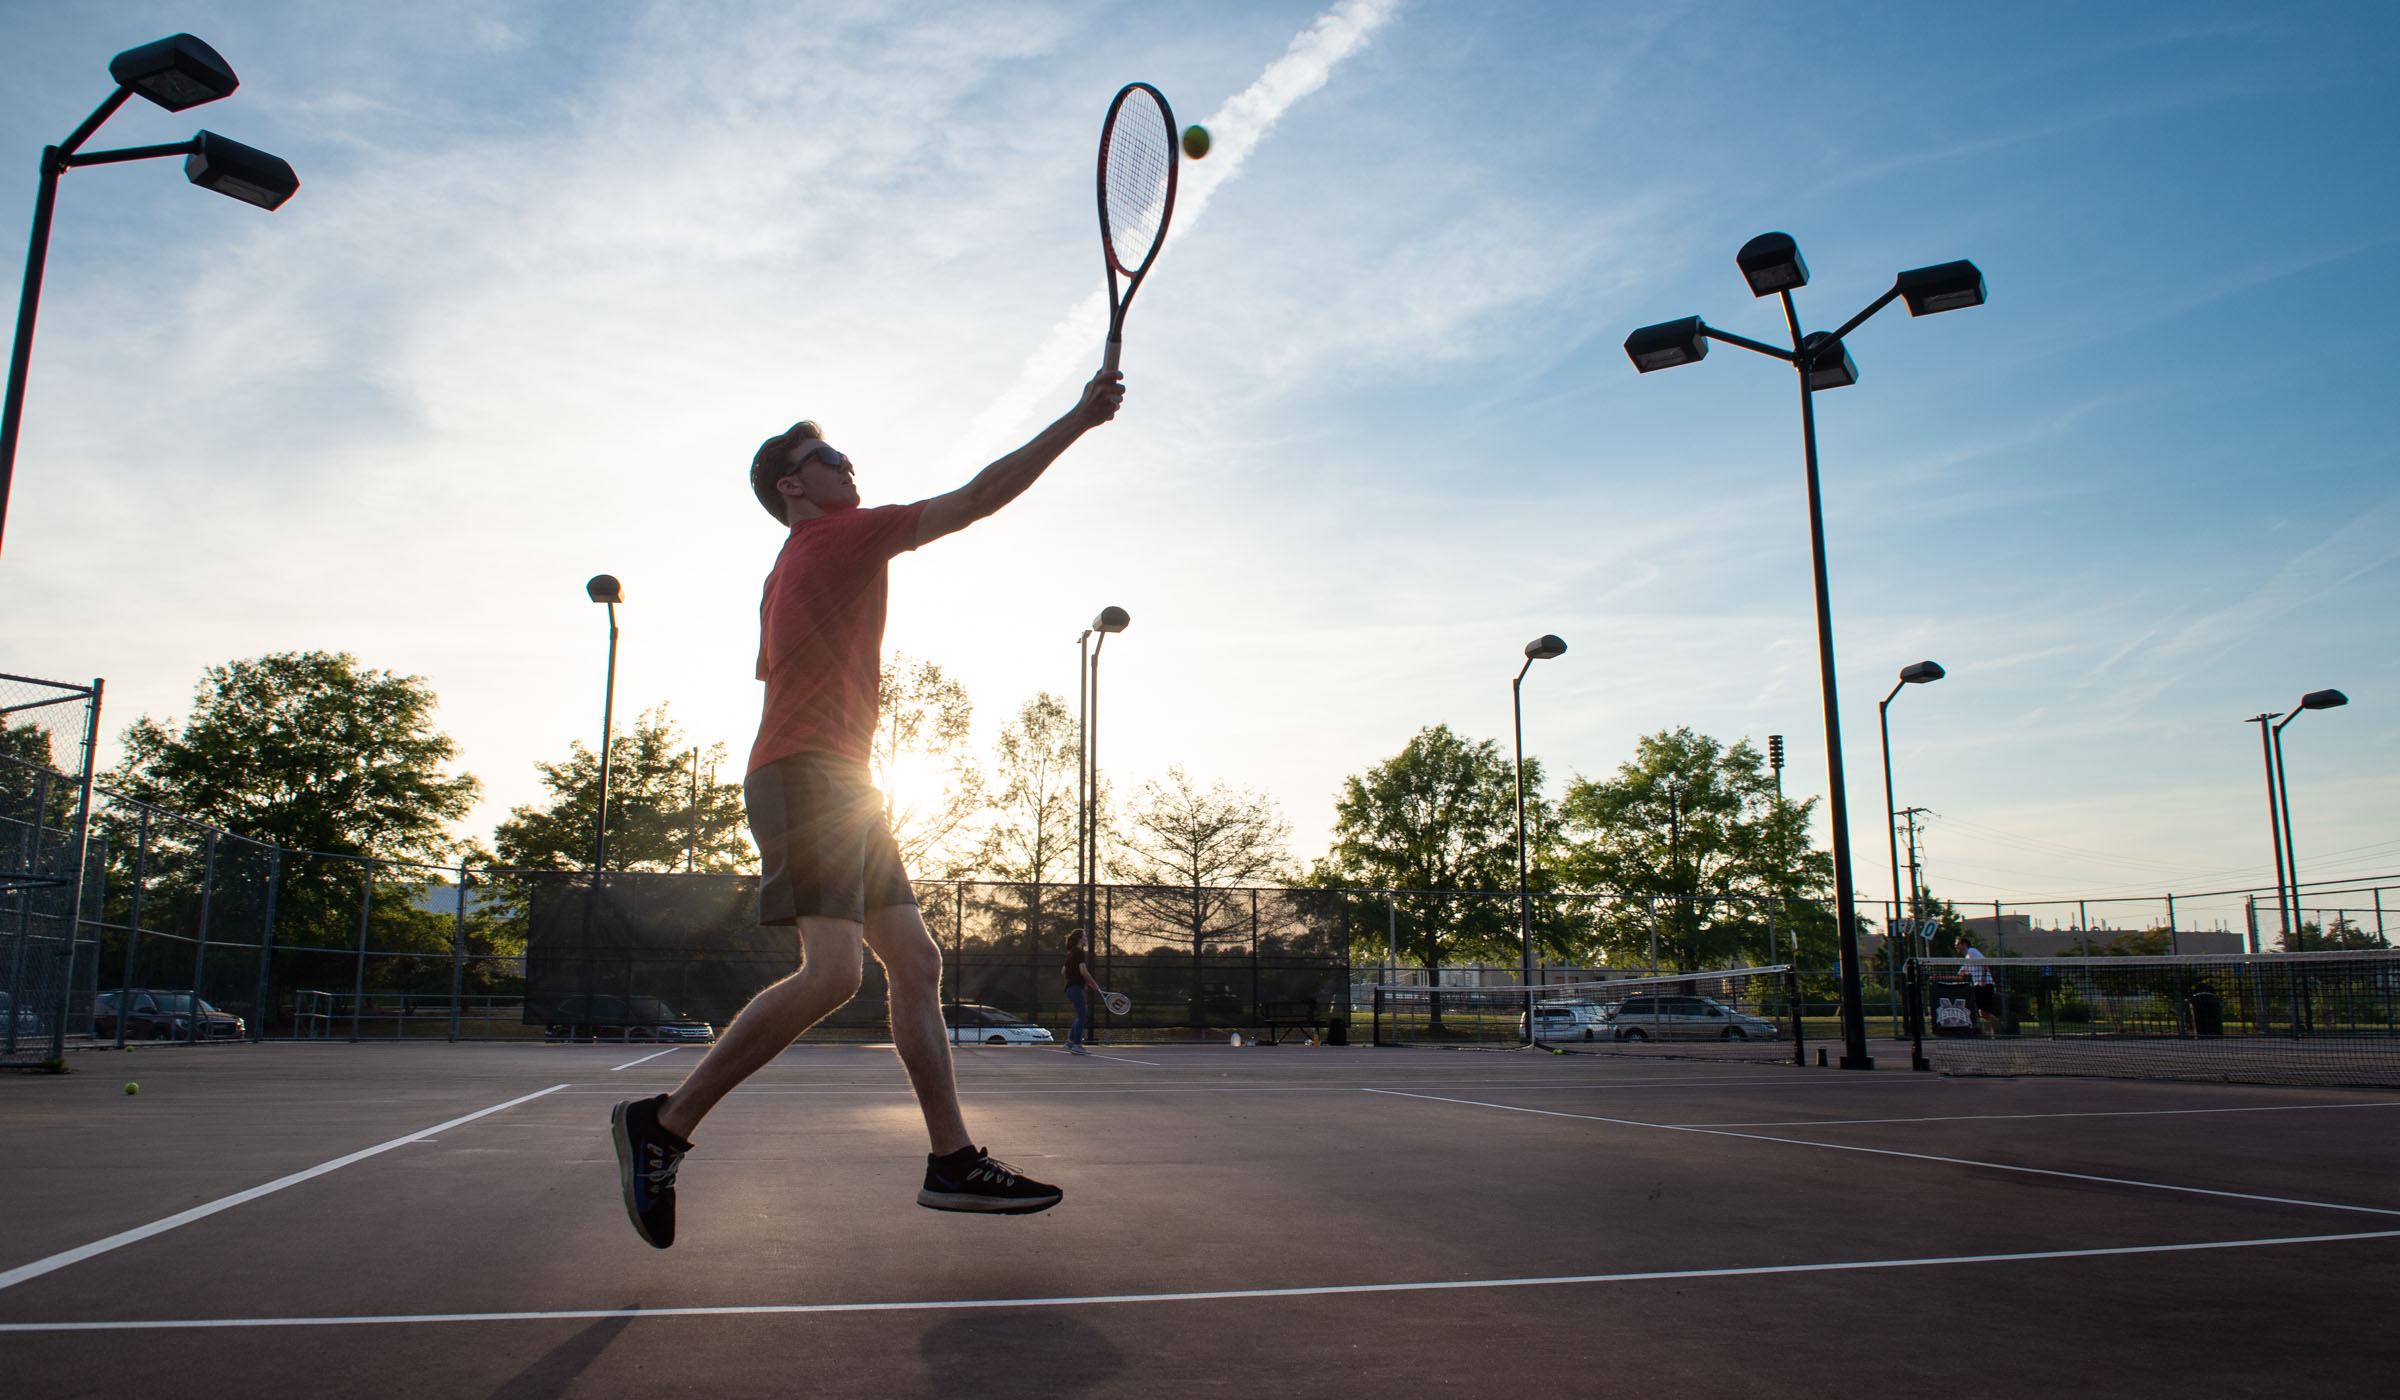 With the setting sun behind him, a tennis player leaps to hit a ball on the Sawyer Tennis Courts.